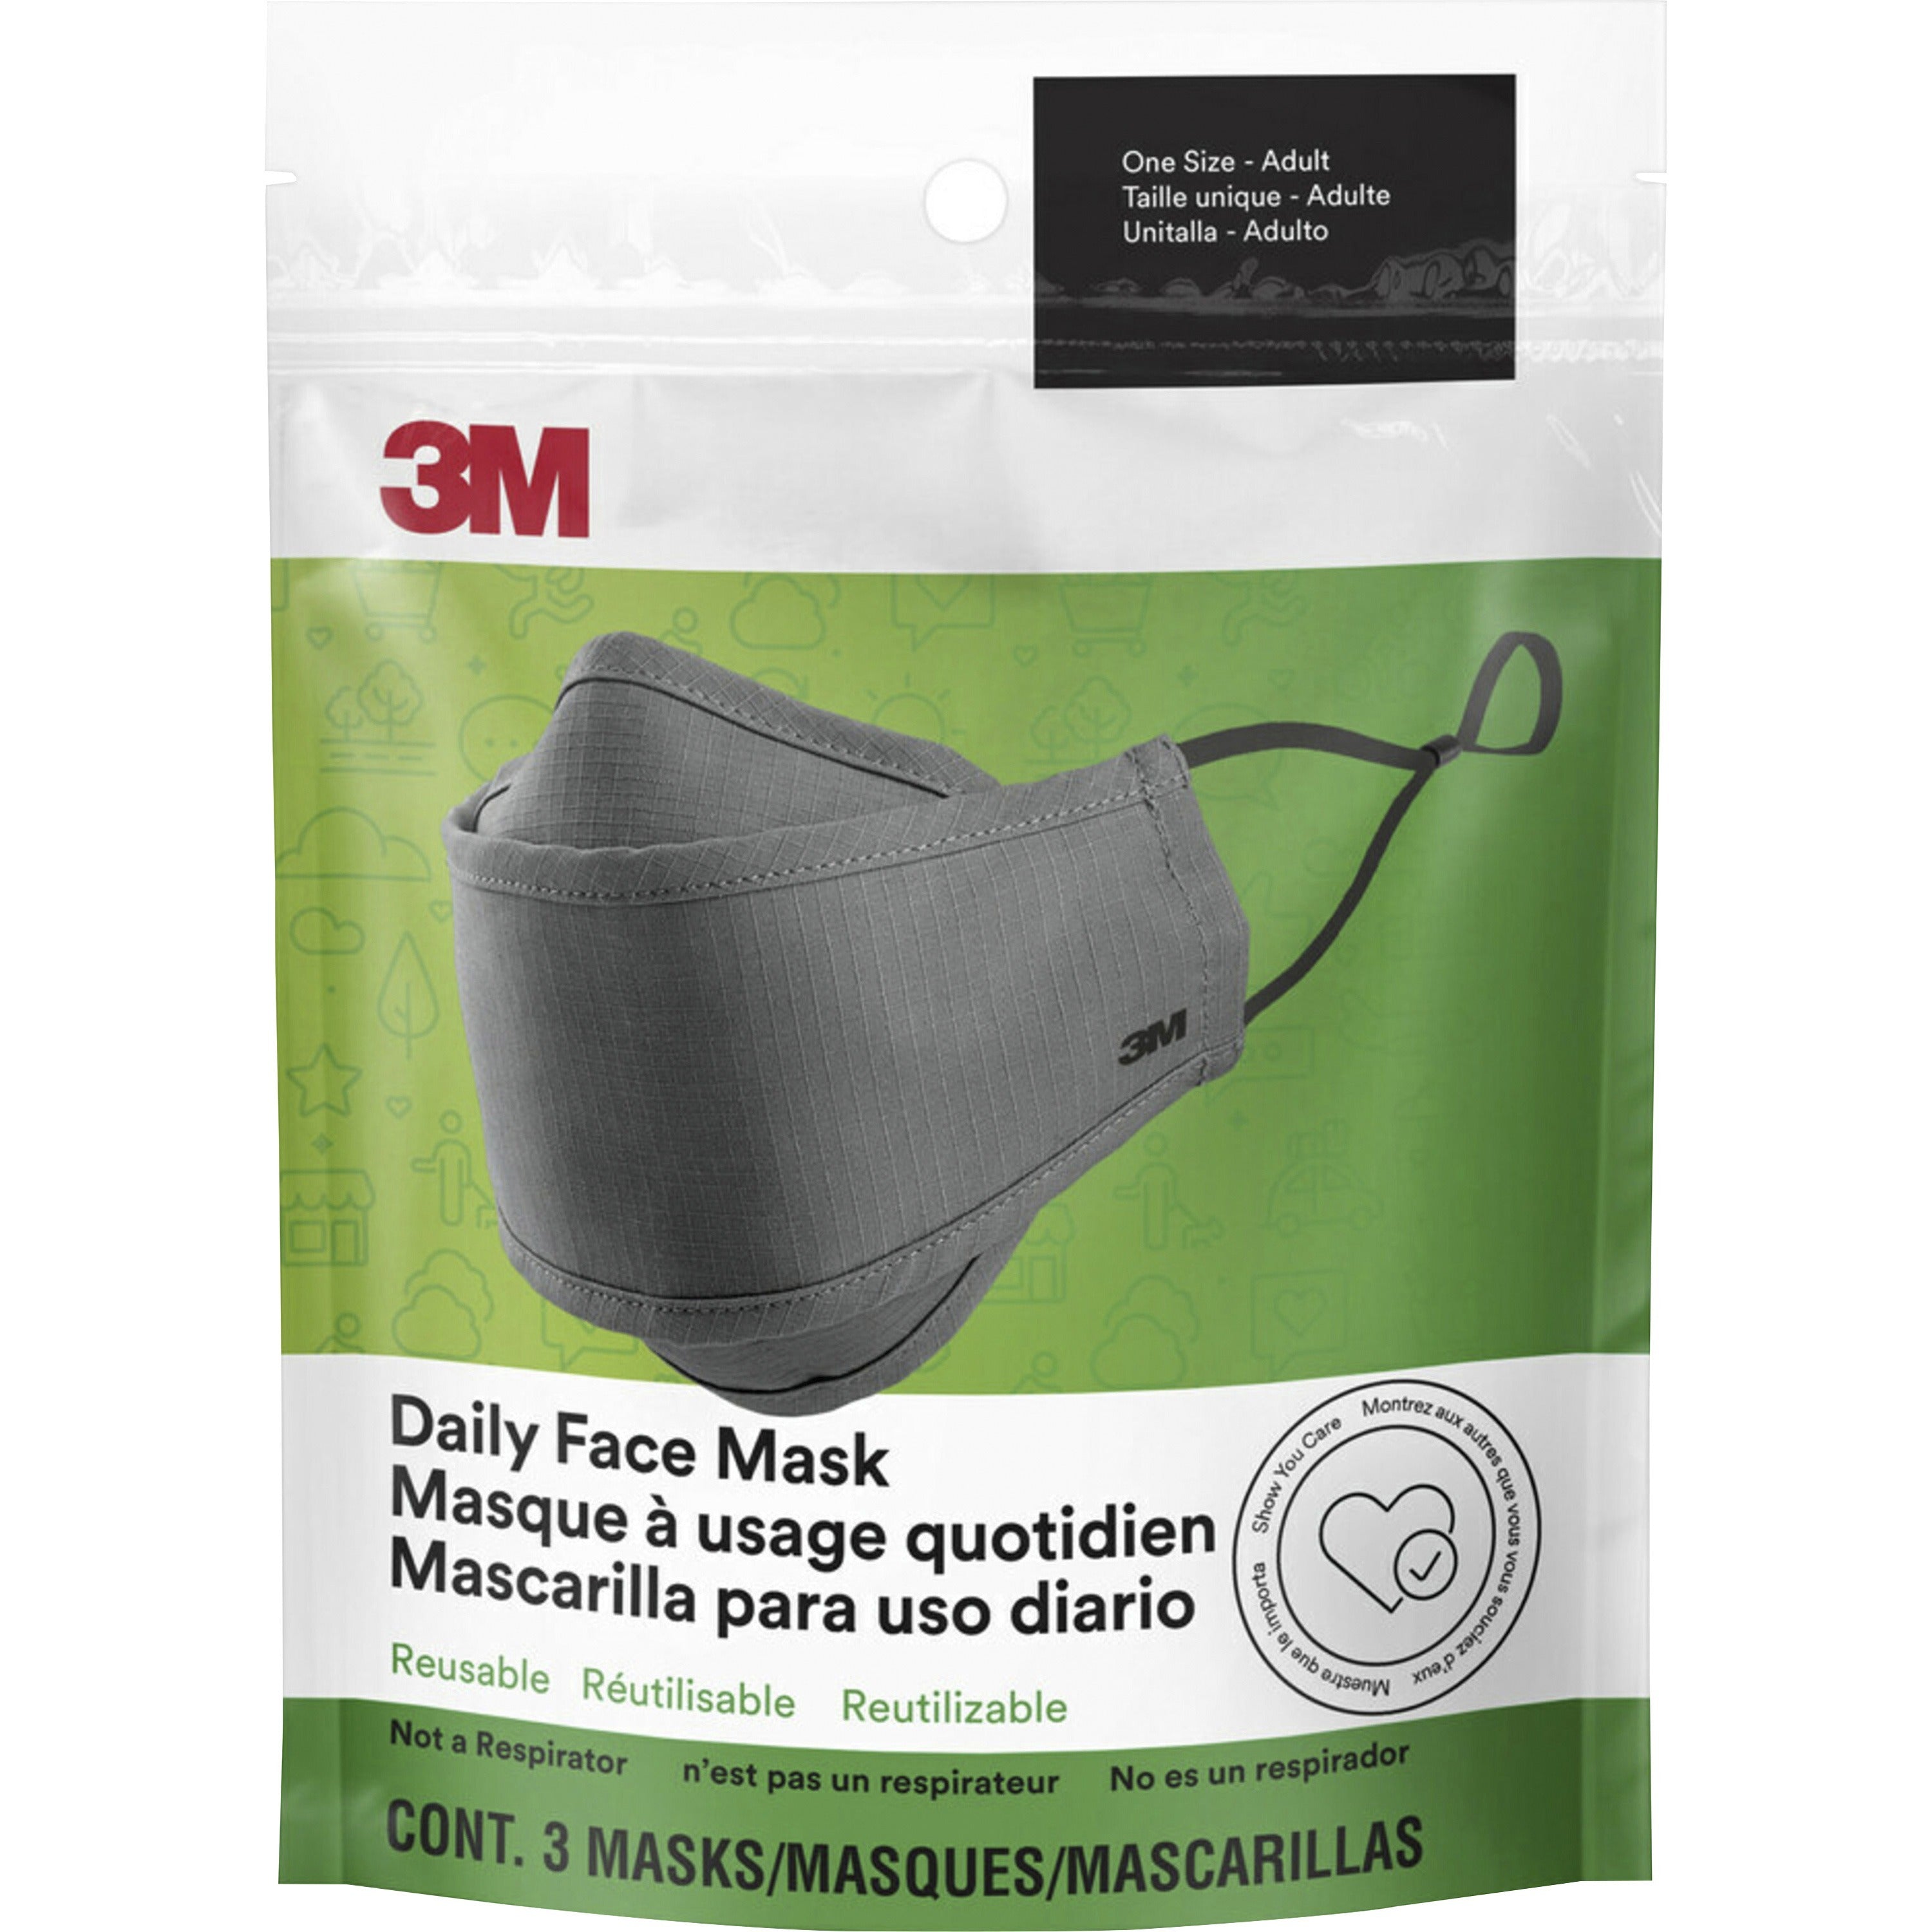 3m-daily-face-masks-recommended-for-face-indoor-outdoor-office-transportation-cotton-fabric-gray-lightweight-breathable-adjustable-elastic-loop-nose-clip-comfortable-washable-3-pack_mmmrfm1003 - 1